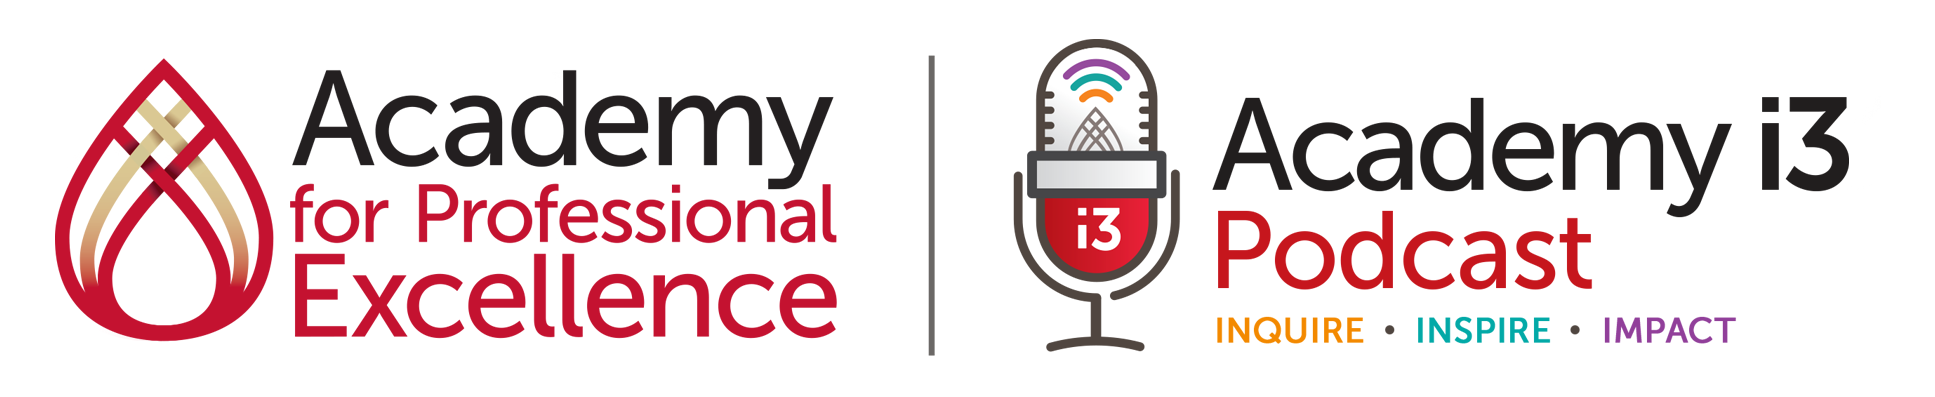 i3 Podcast | Academy for Professional Excellence